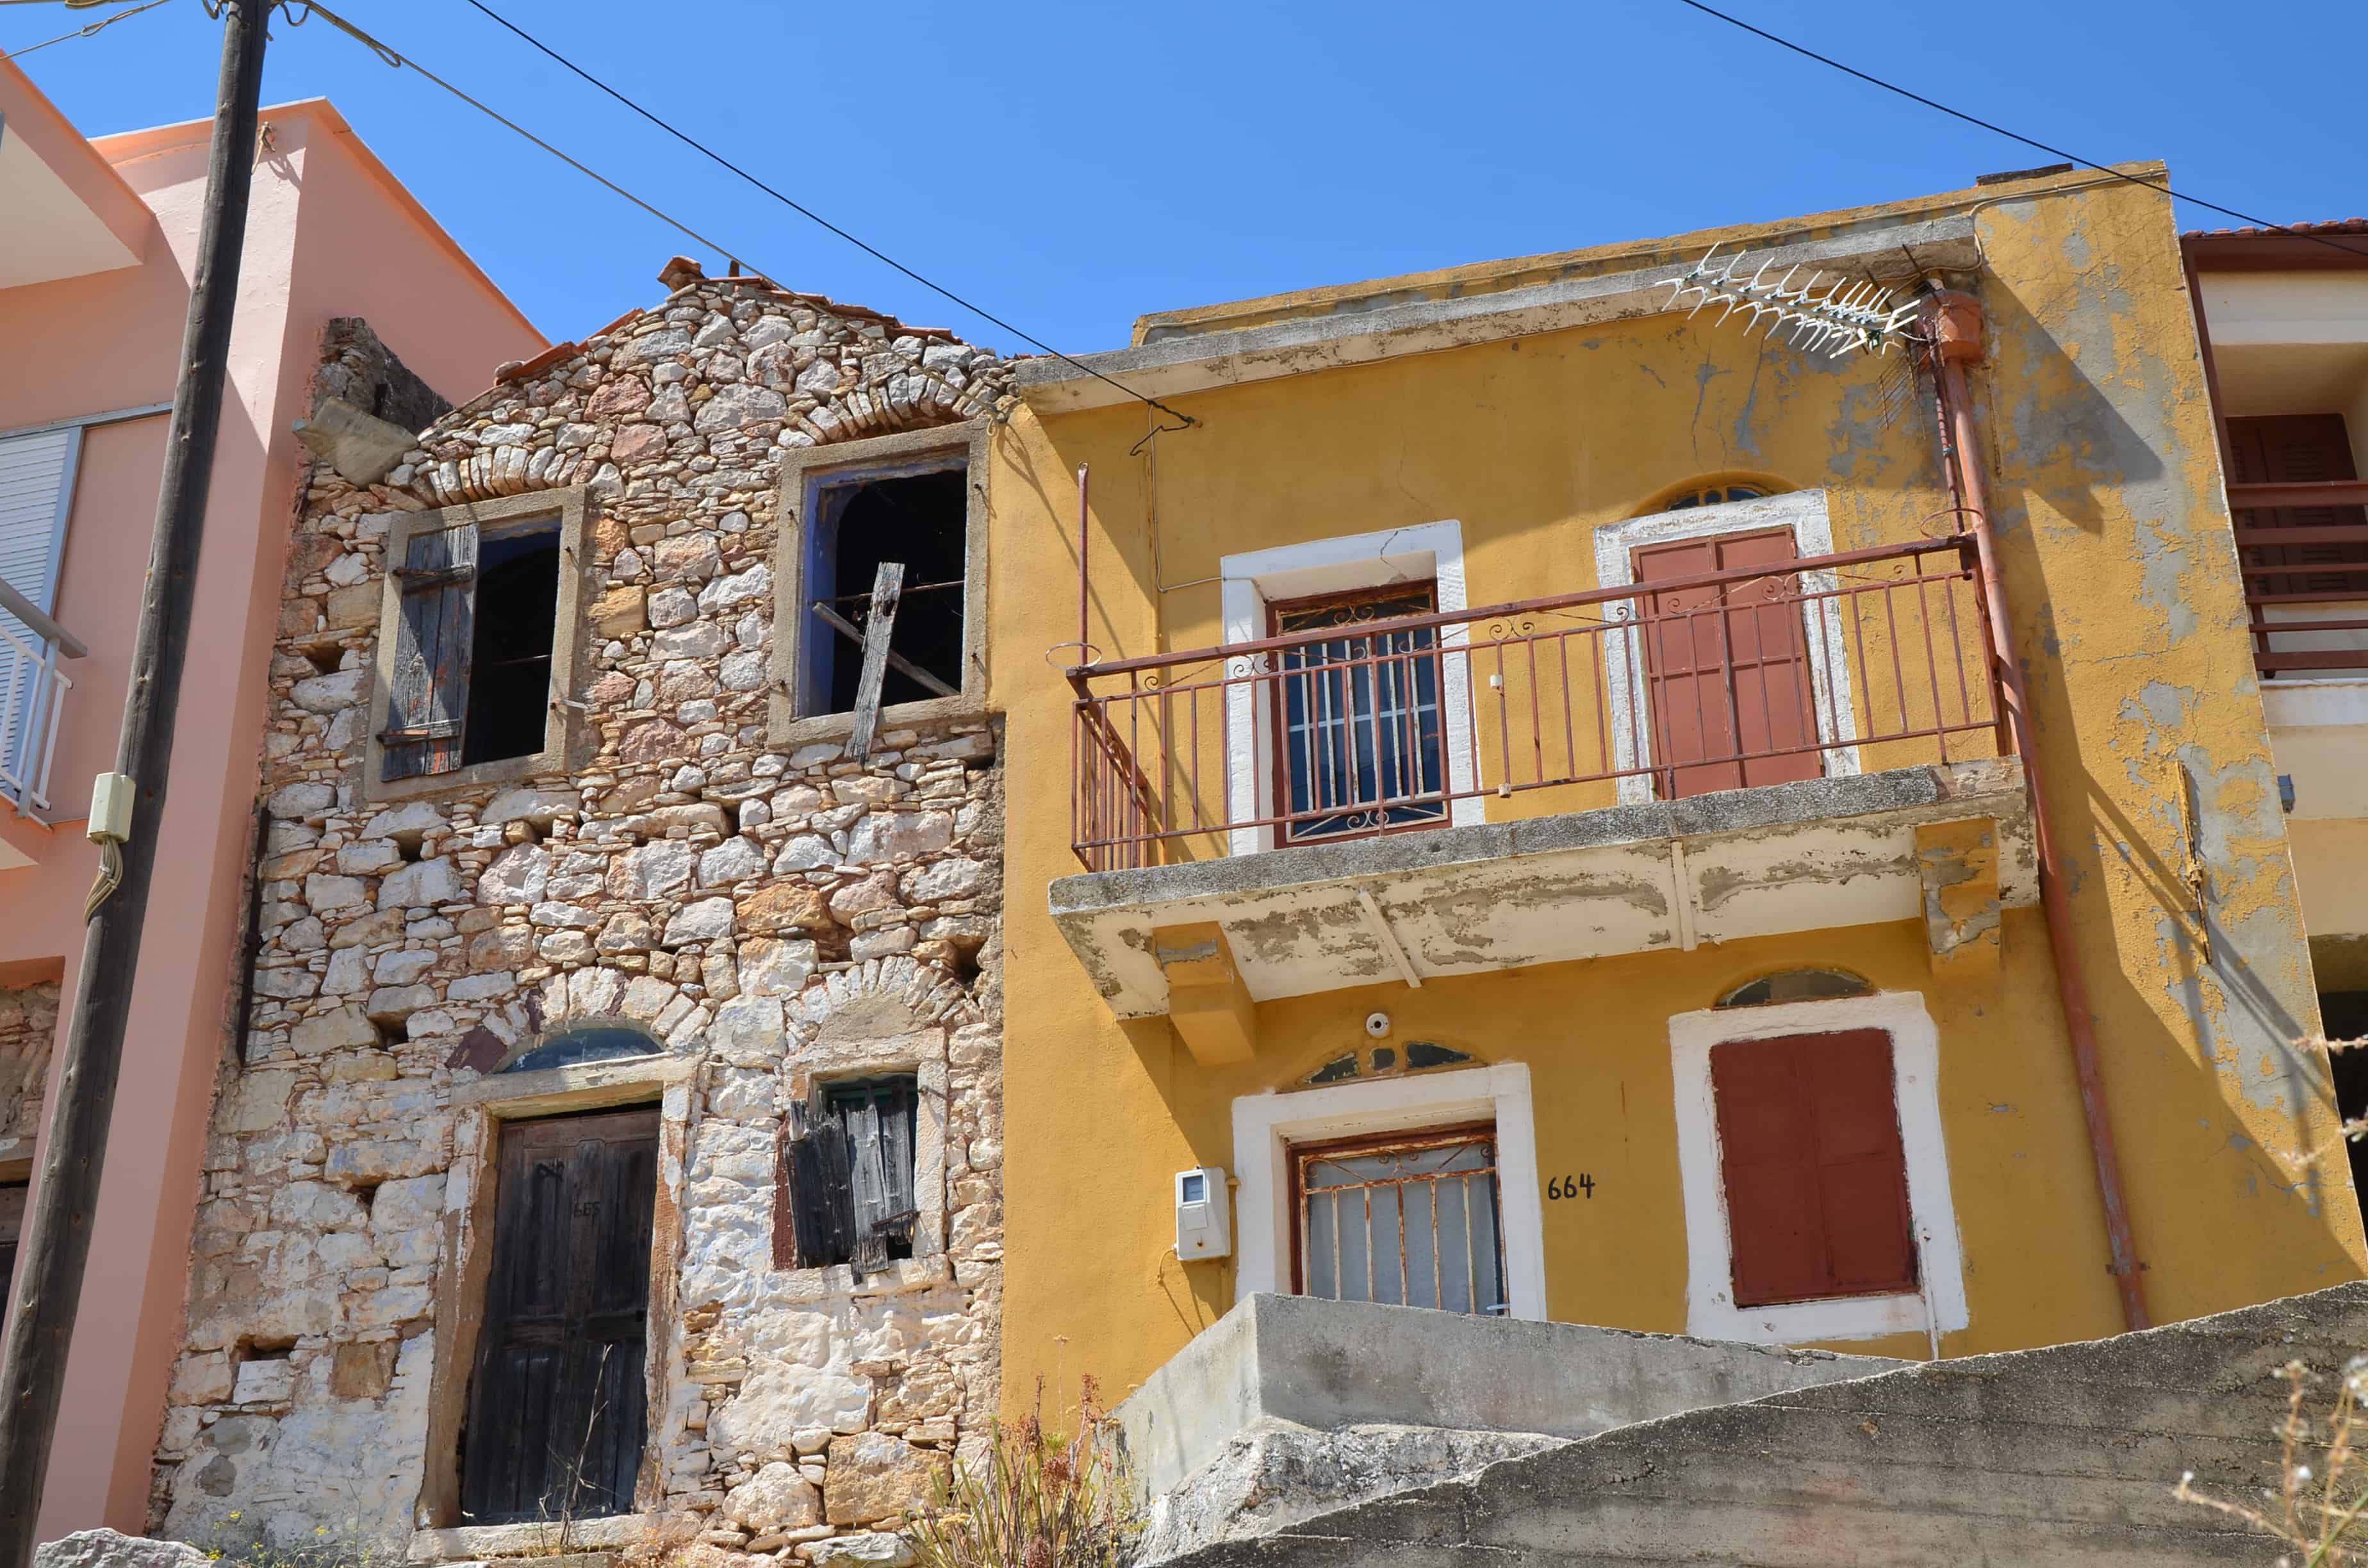 My great-great-grandmother's house (left) and my great-grandmother's house (right) in Tholopotami, Chios, Greece